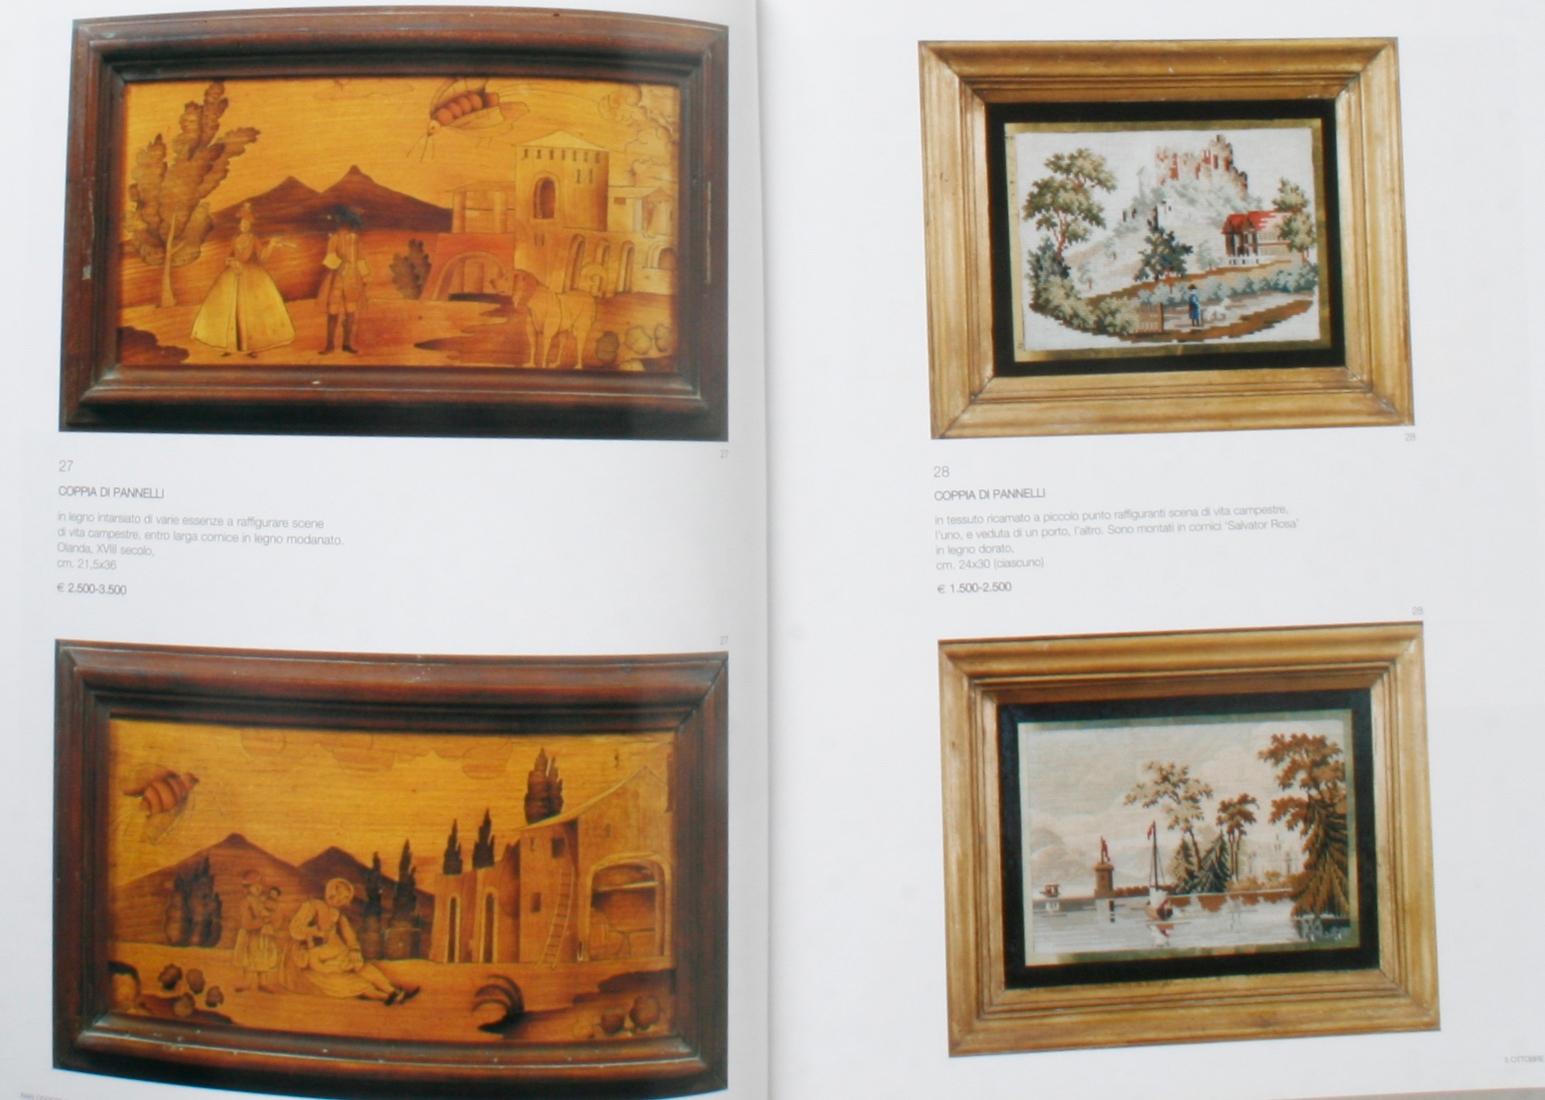 Auction Catalogue of Italian Fine Art, Silver, Ivory, and Venetian Objects, 2006 For Sale 4